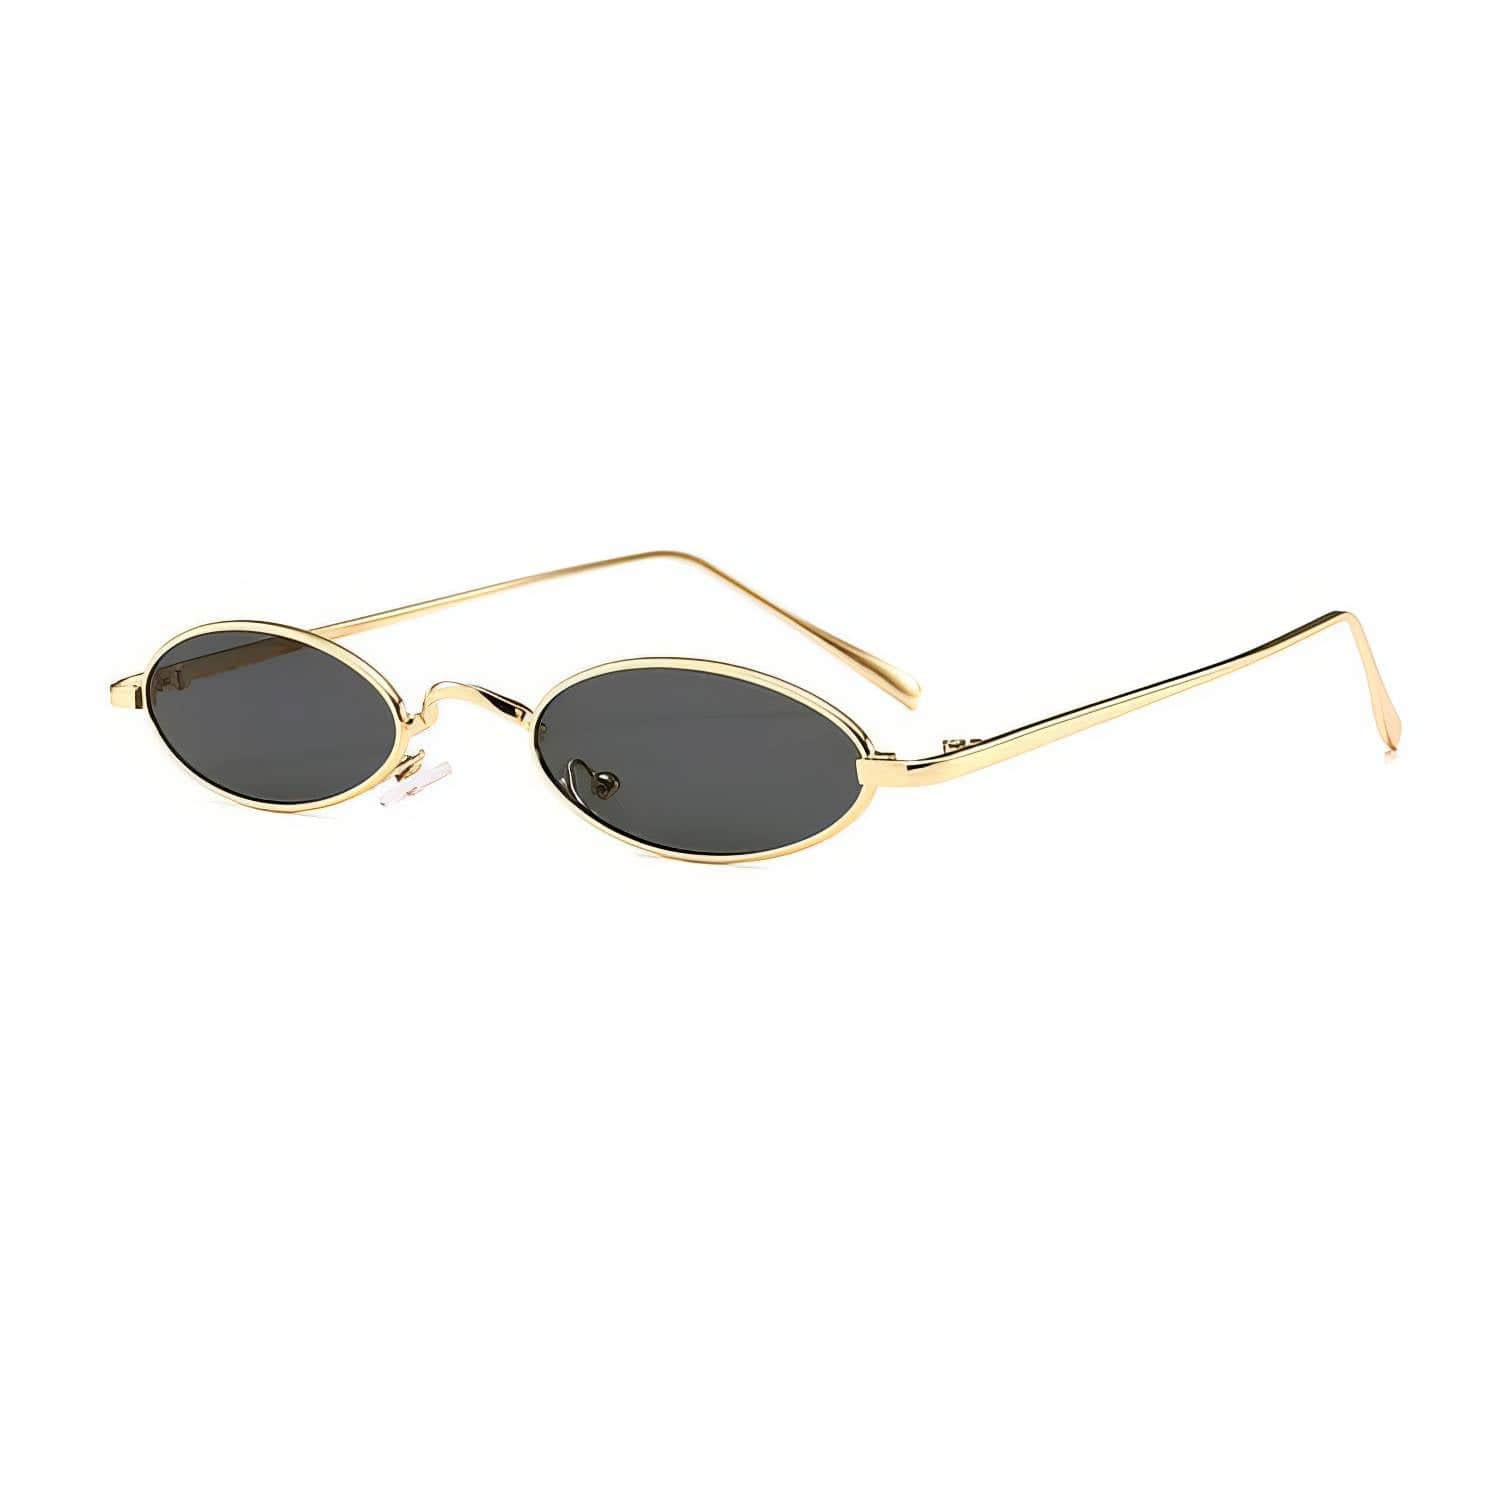 Oval Small Metal Frame Sunglasses Black/Gold / Resin